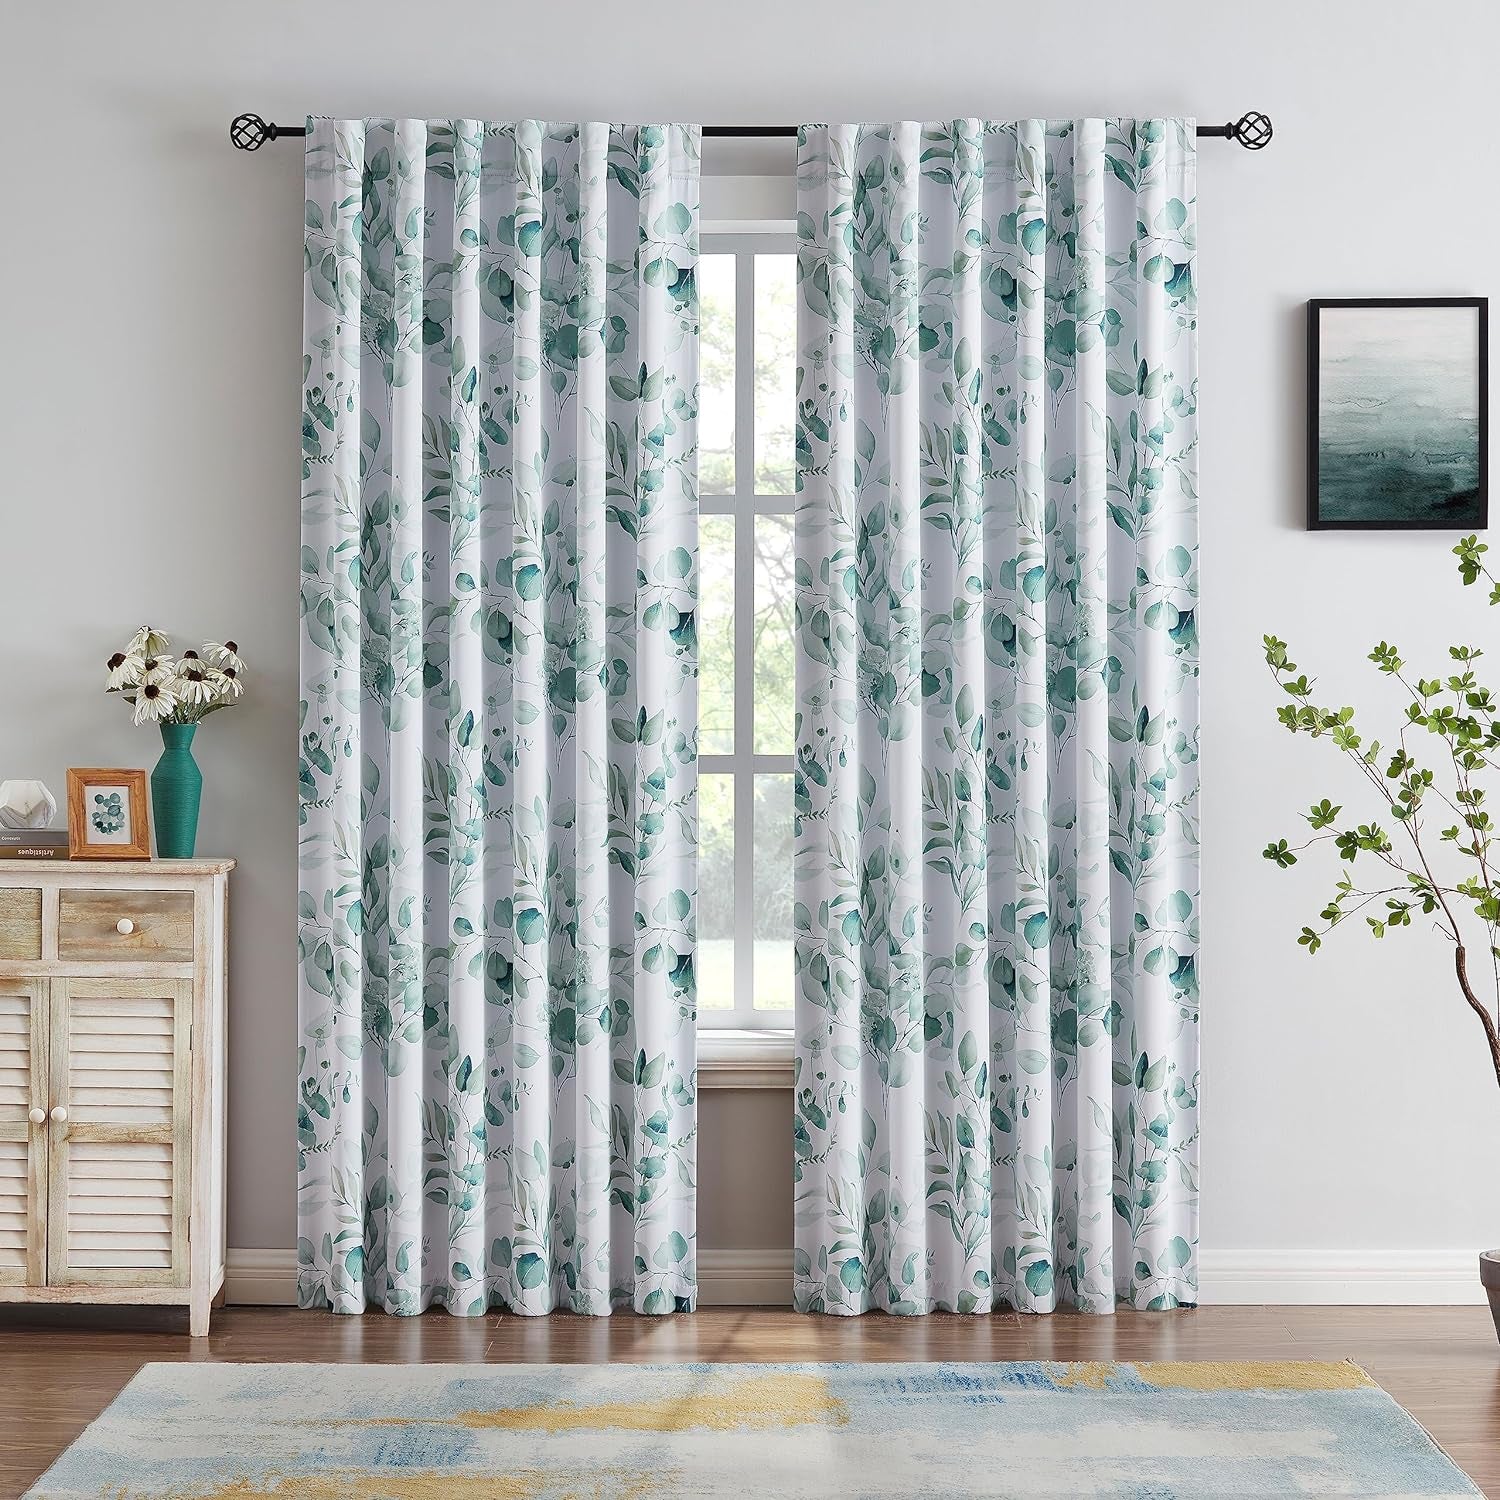 Xwincel Botanical Print Full Blackout Curtain Panels, Thermal Insulated Sound Proofing Drapes for Bedroom Living Room Rod Pocket Window Treatment Sets with Black Liner 52" W X 63" L 2 Panels, Green  Xwincel   